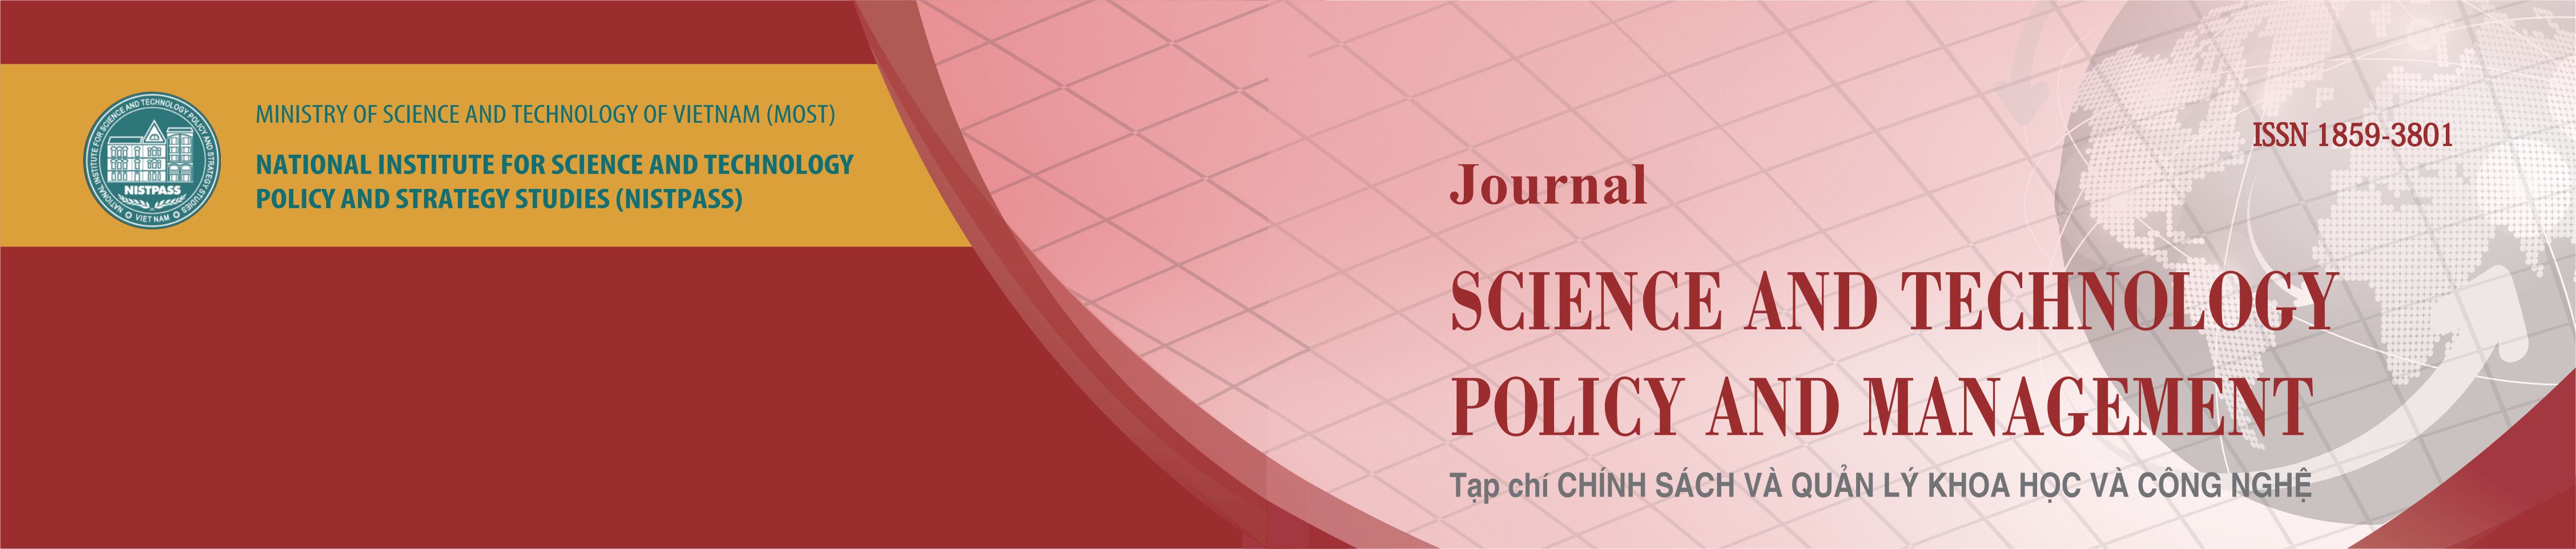 case study on science and technology journal